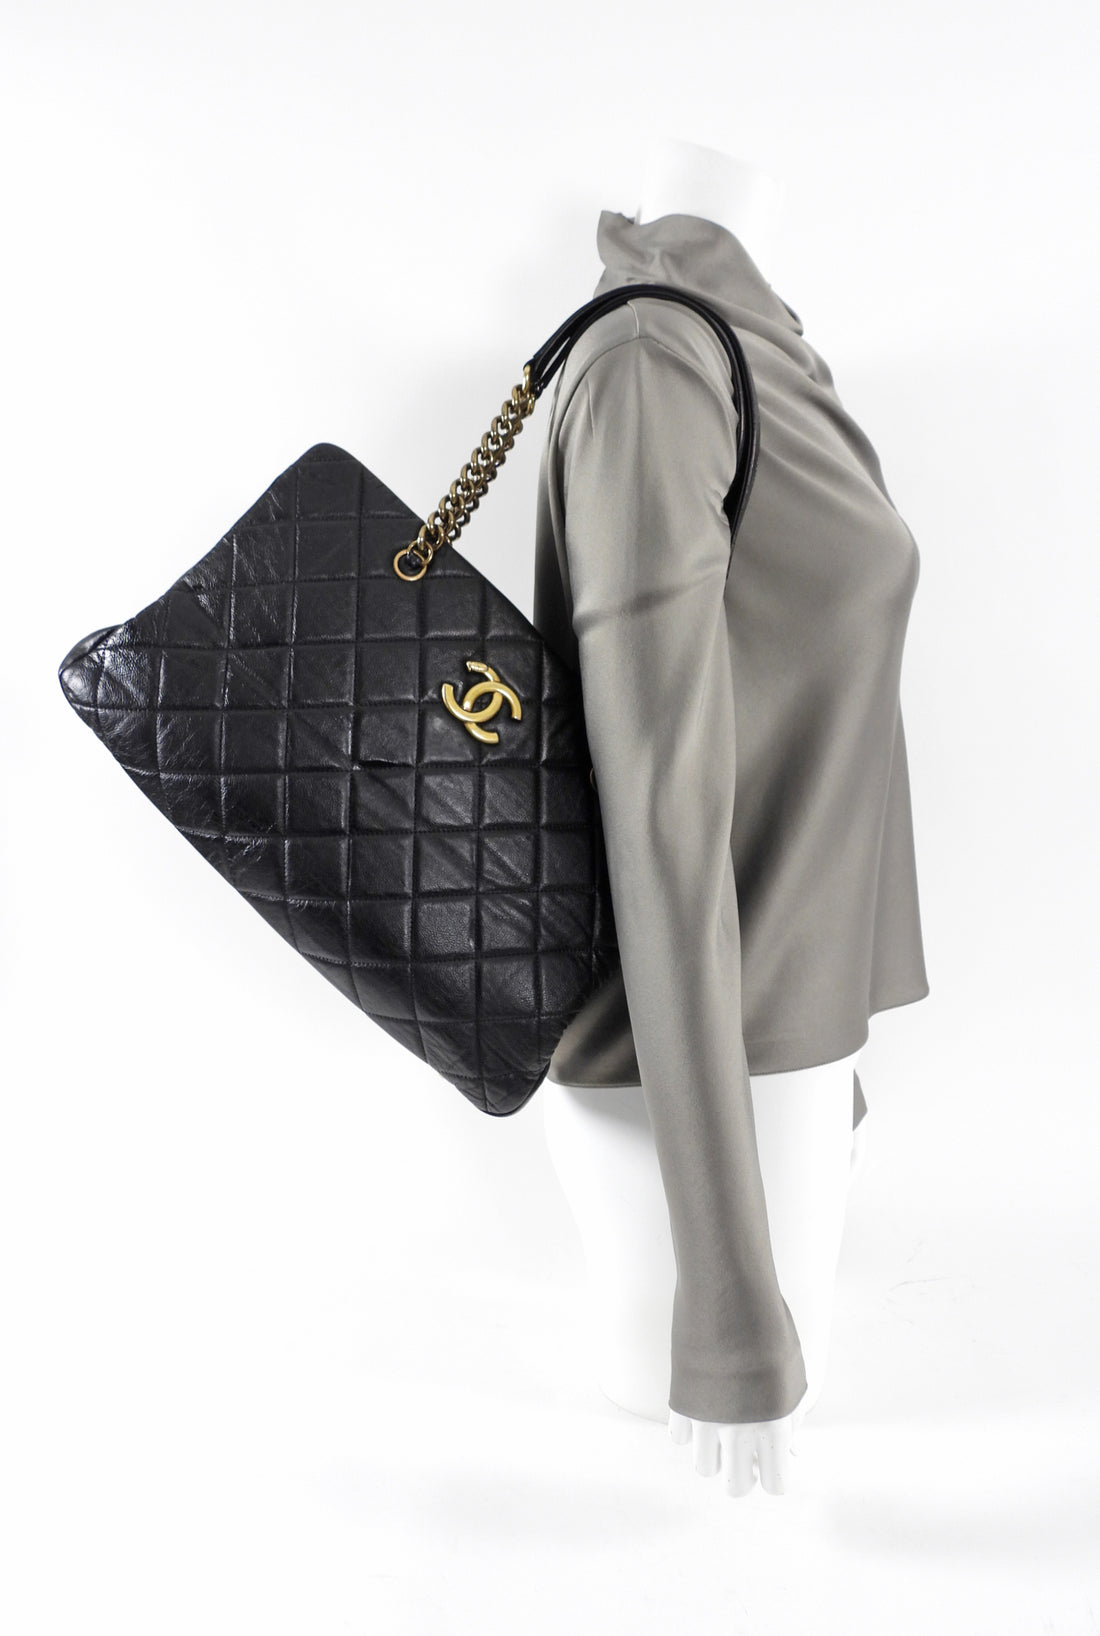 Chanel Black Leather Quilted Chain Tote Bag